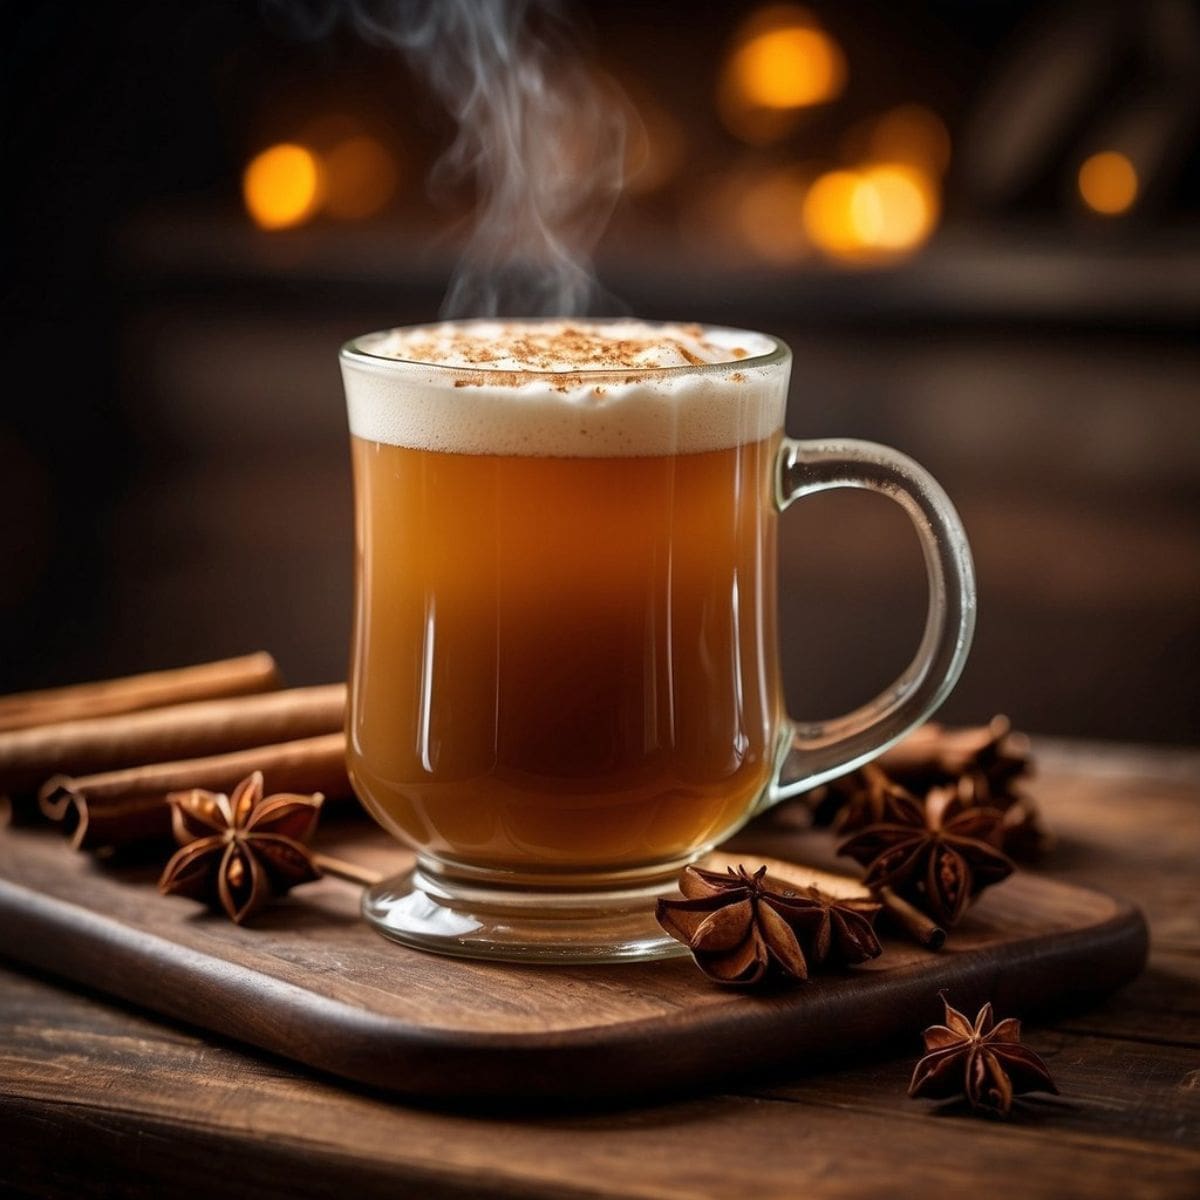 A close-up photo of a steaming cup of spiced hot buttered rum on a wooden table.